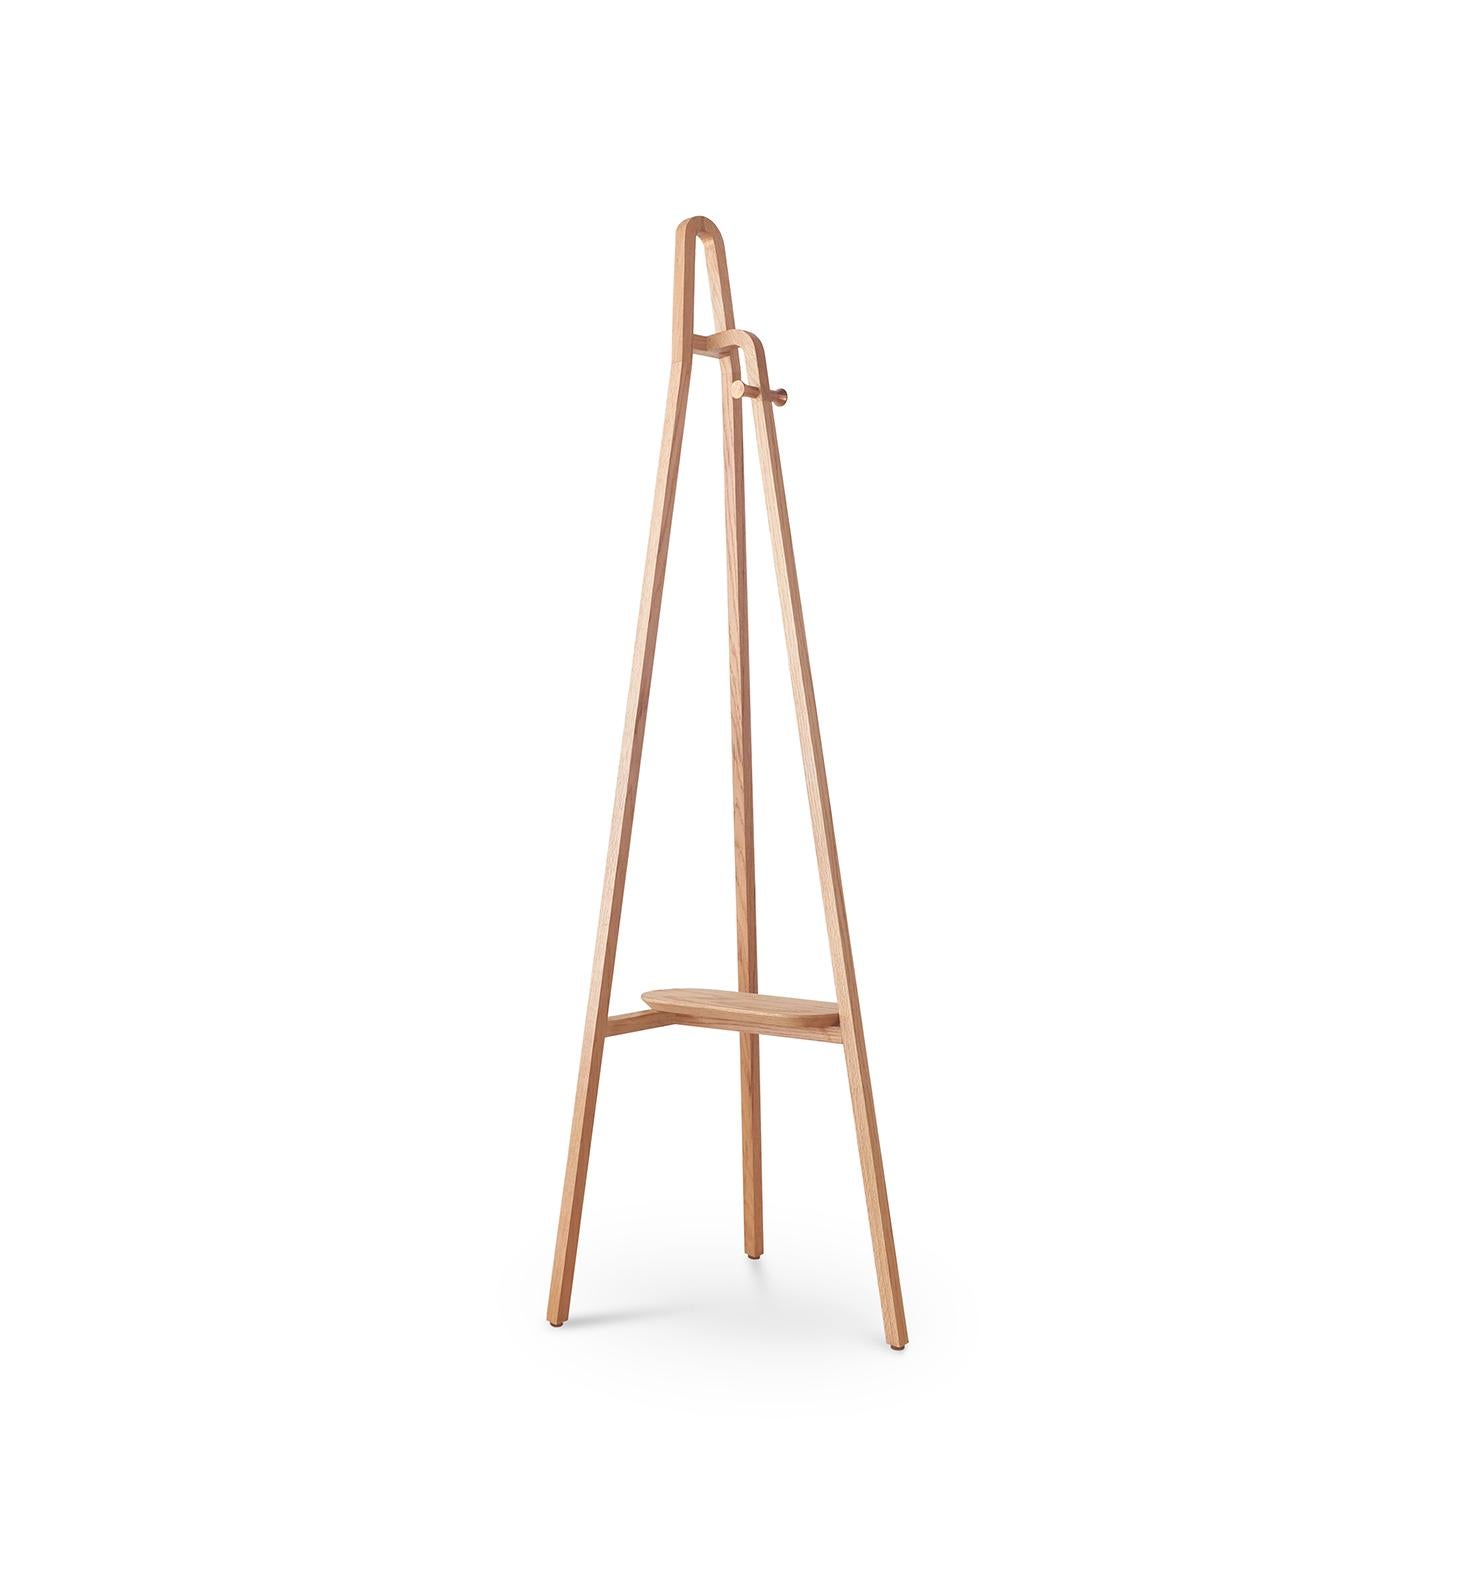 Hand-Crafted Tono G Coat Stand, Mexican contemporary design by Emiliano Molina for CUCHARA For Sale